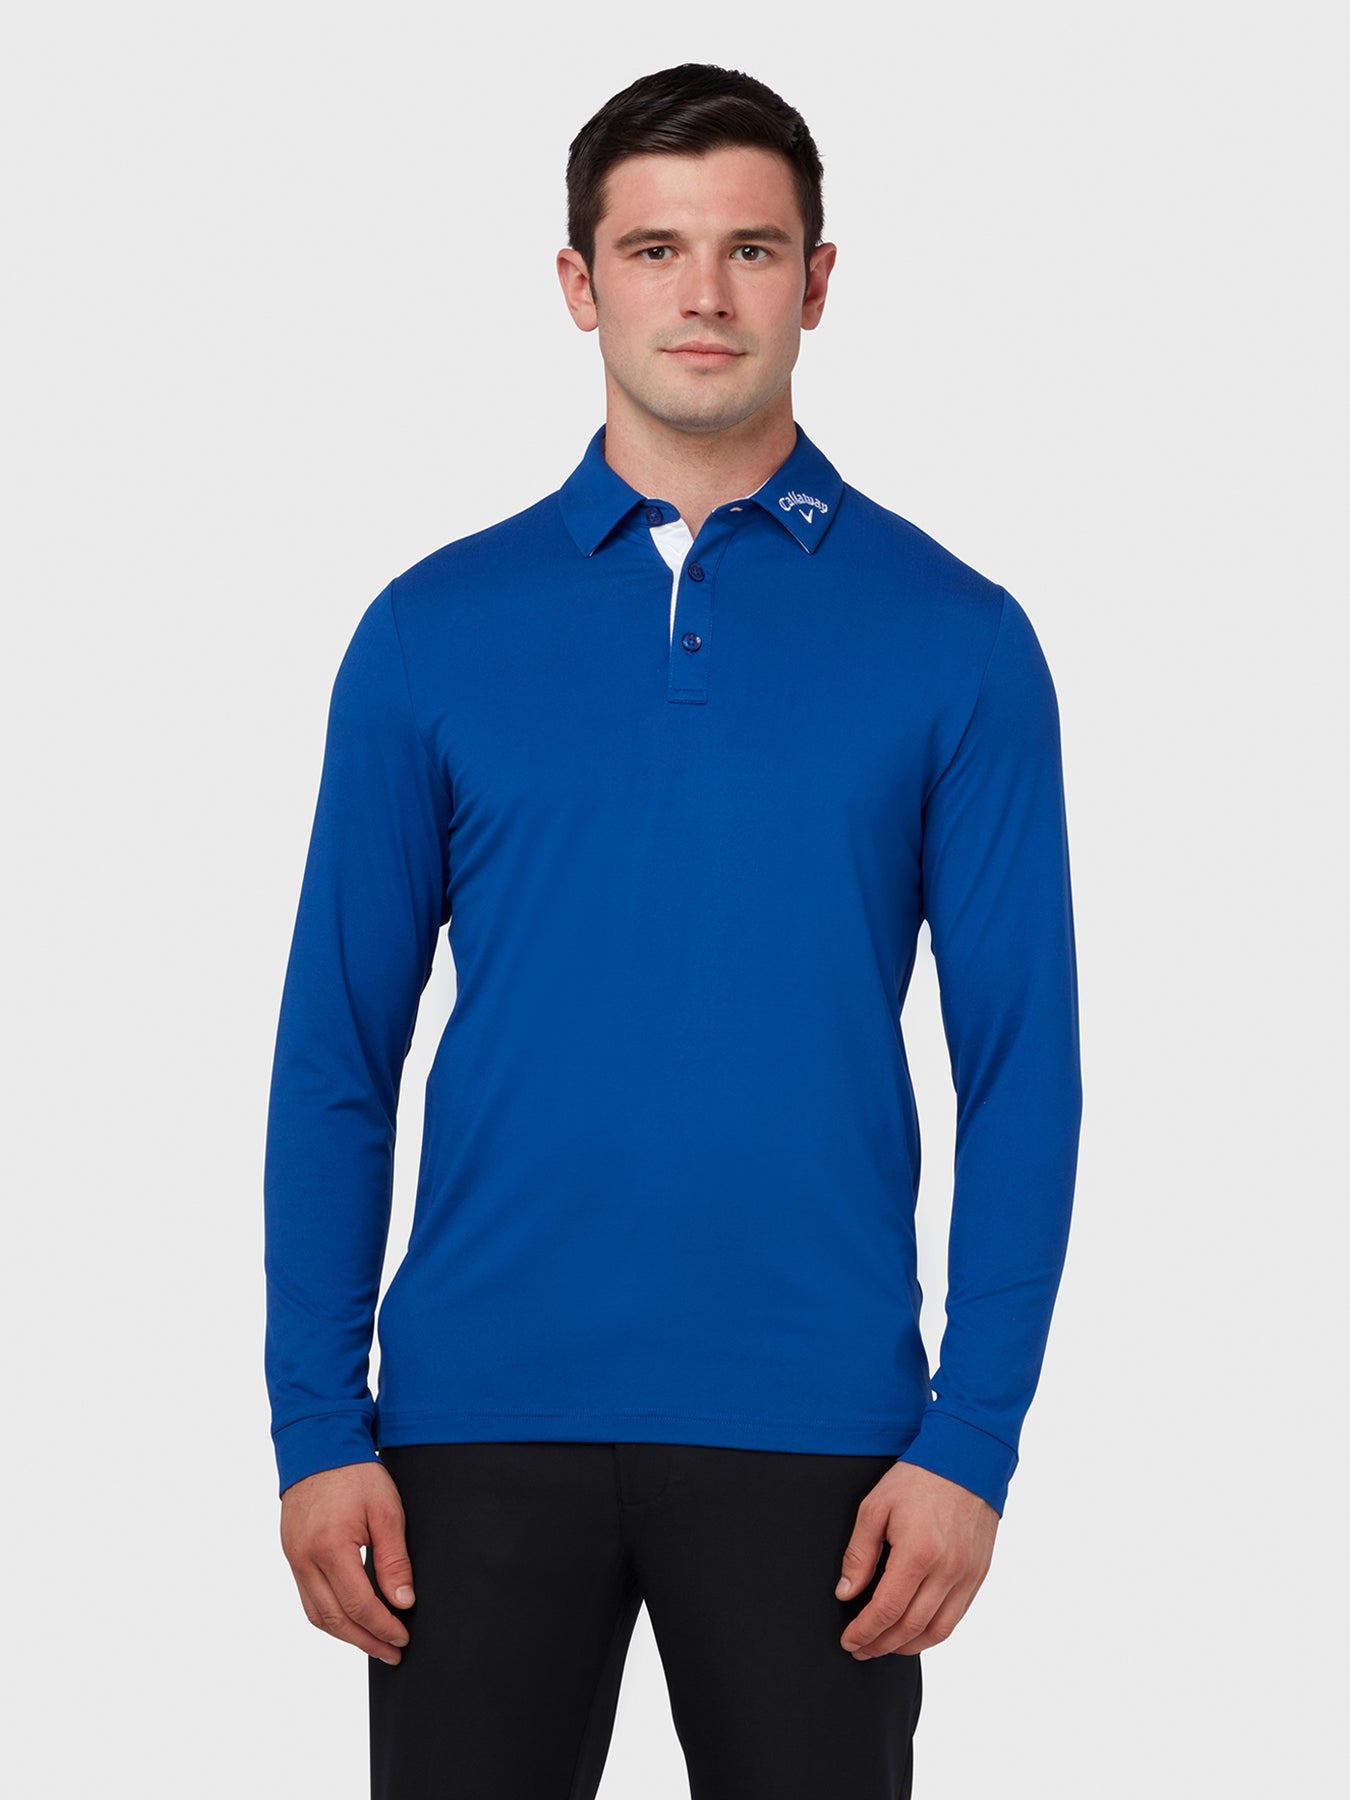 View Long Sleeve Performance Polo In Mazarine Blue information